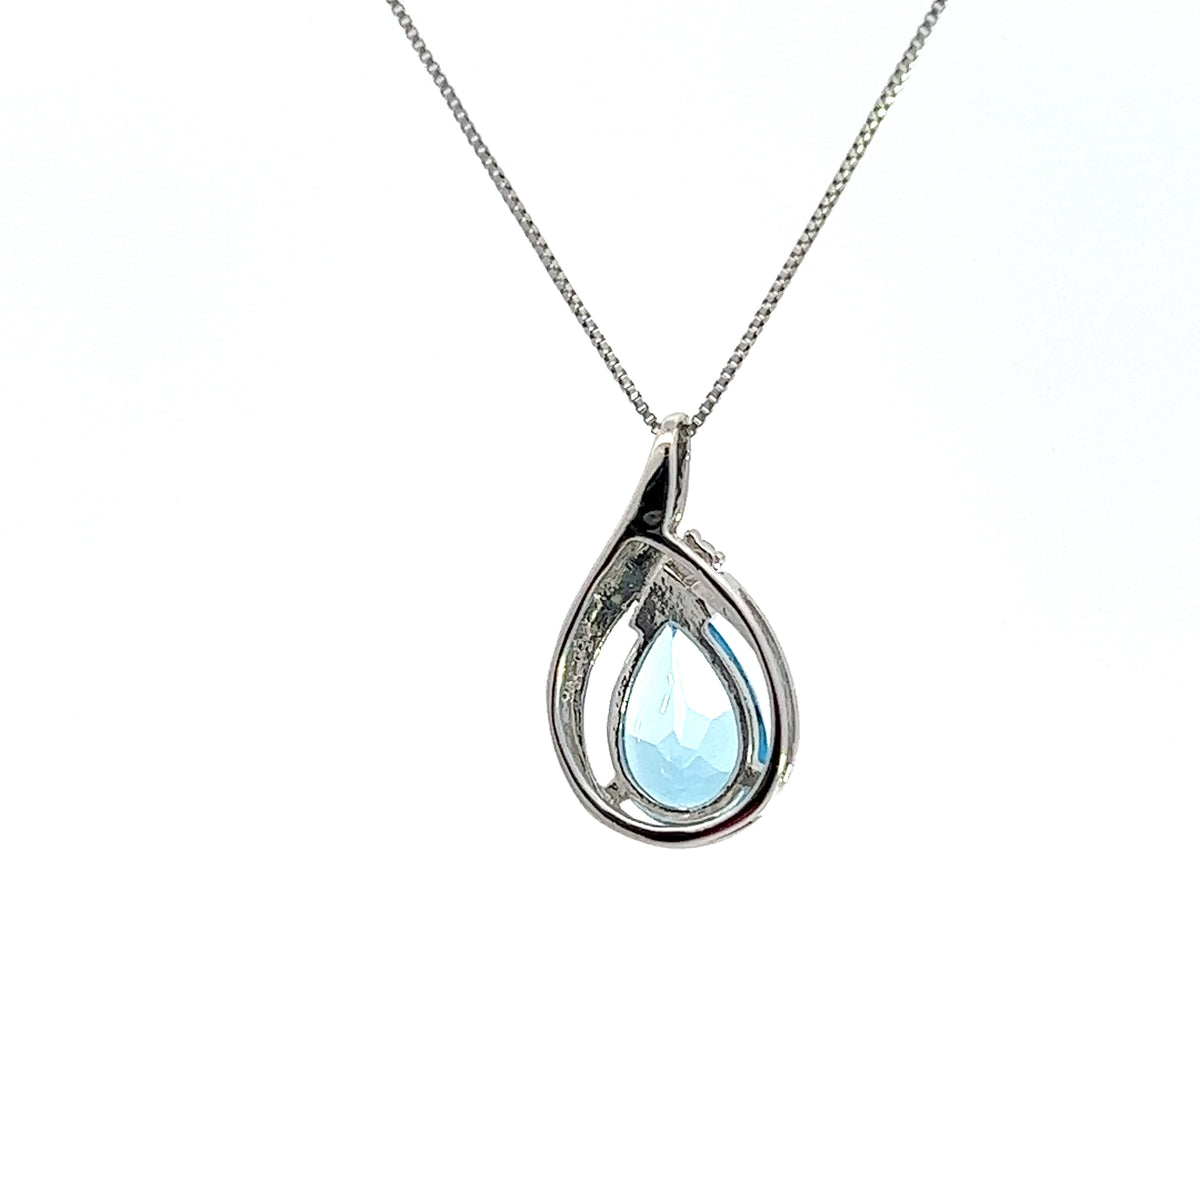 10K White Gold 9x6mm Blue Topaz and 0.015cttw Diamond Necklace - 18 Inches